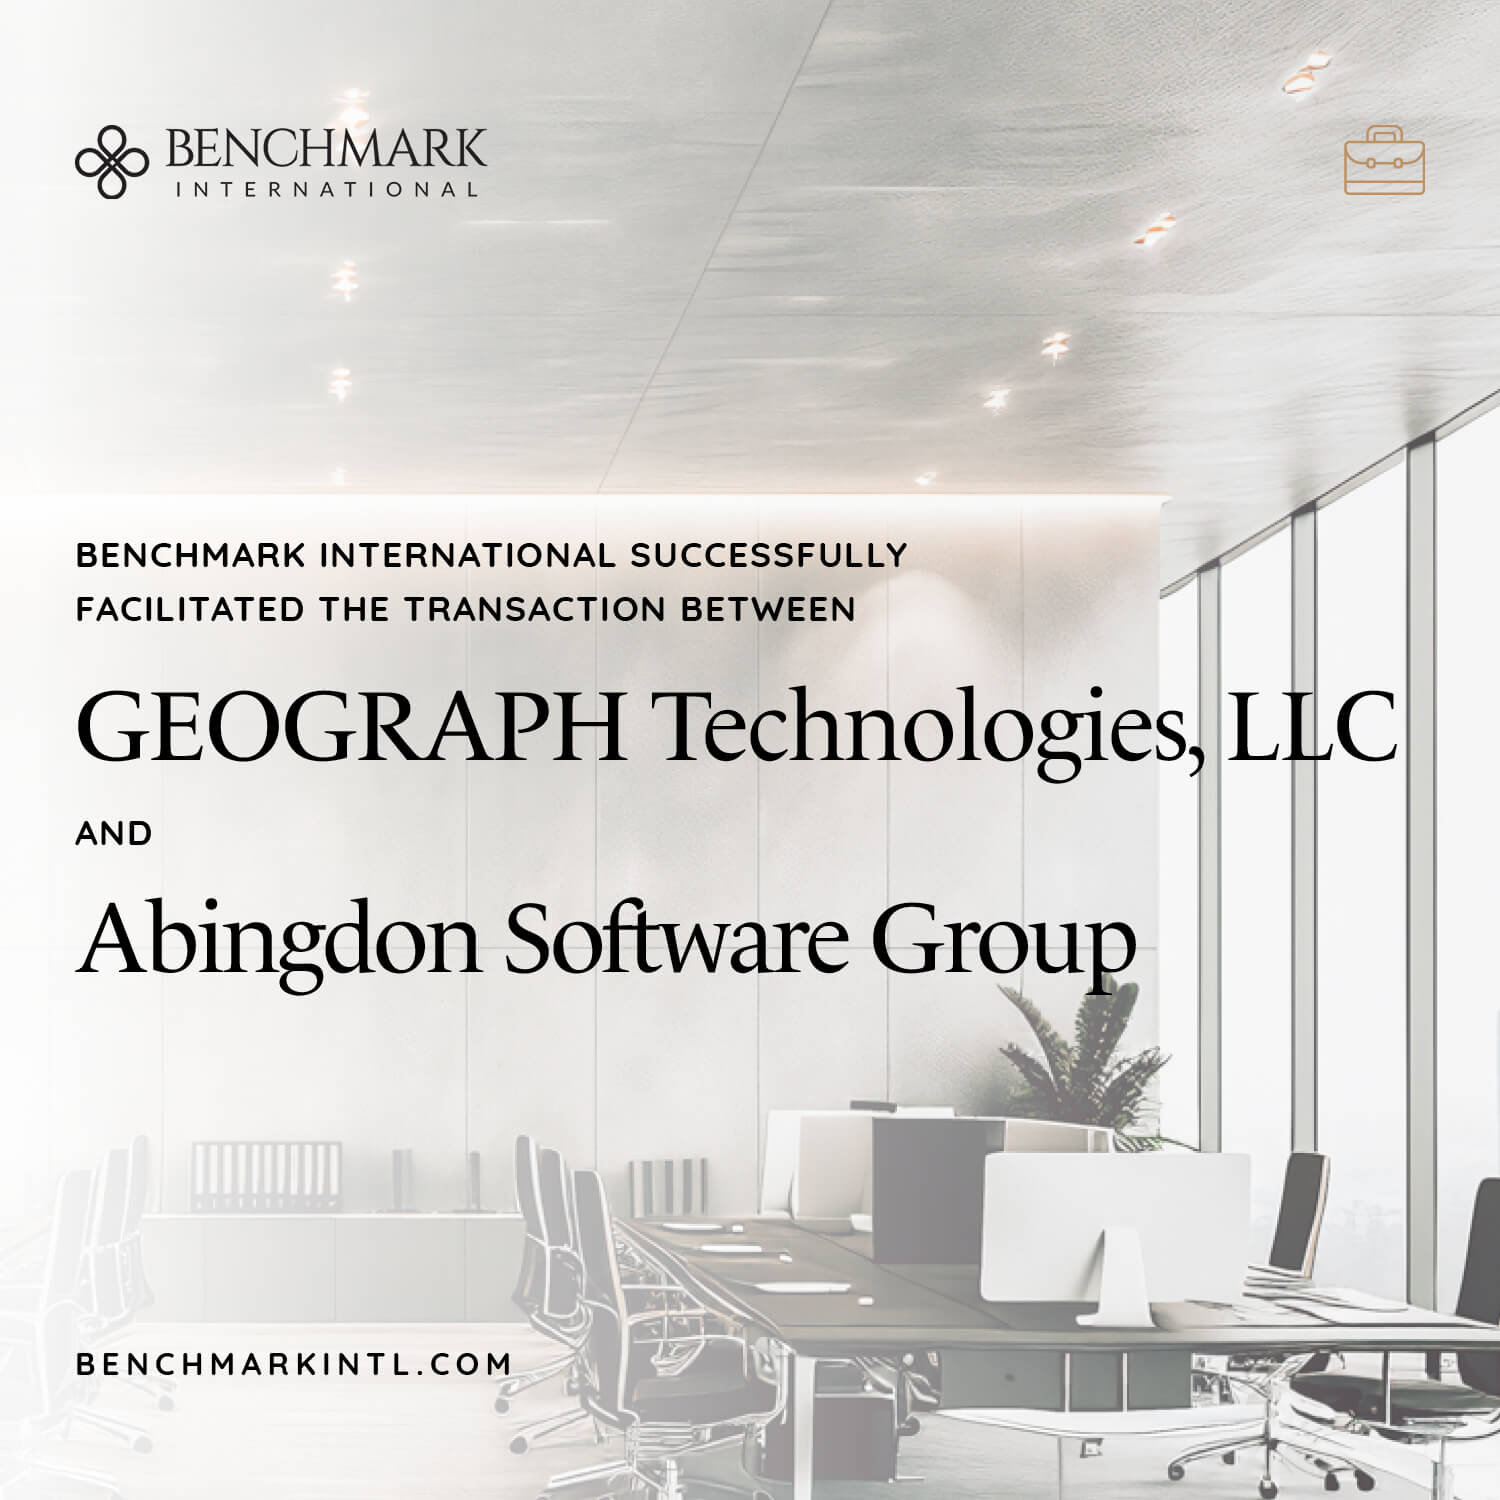 Benchmark International Successfully Facilitated a Transaction Between GEOGRAPH Technologies, LLC and Abingdon Software Group